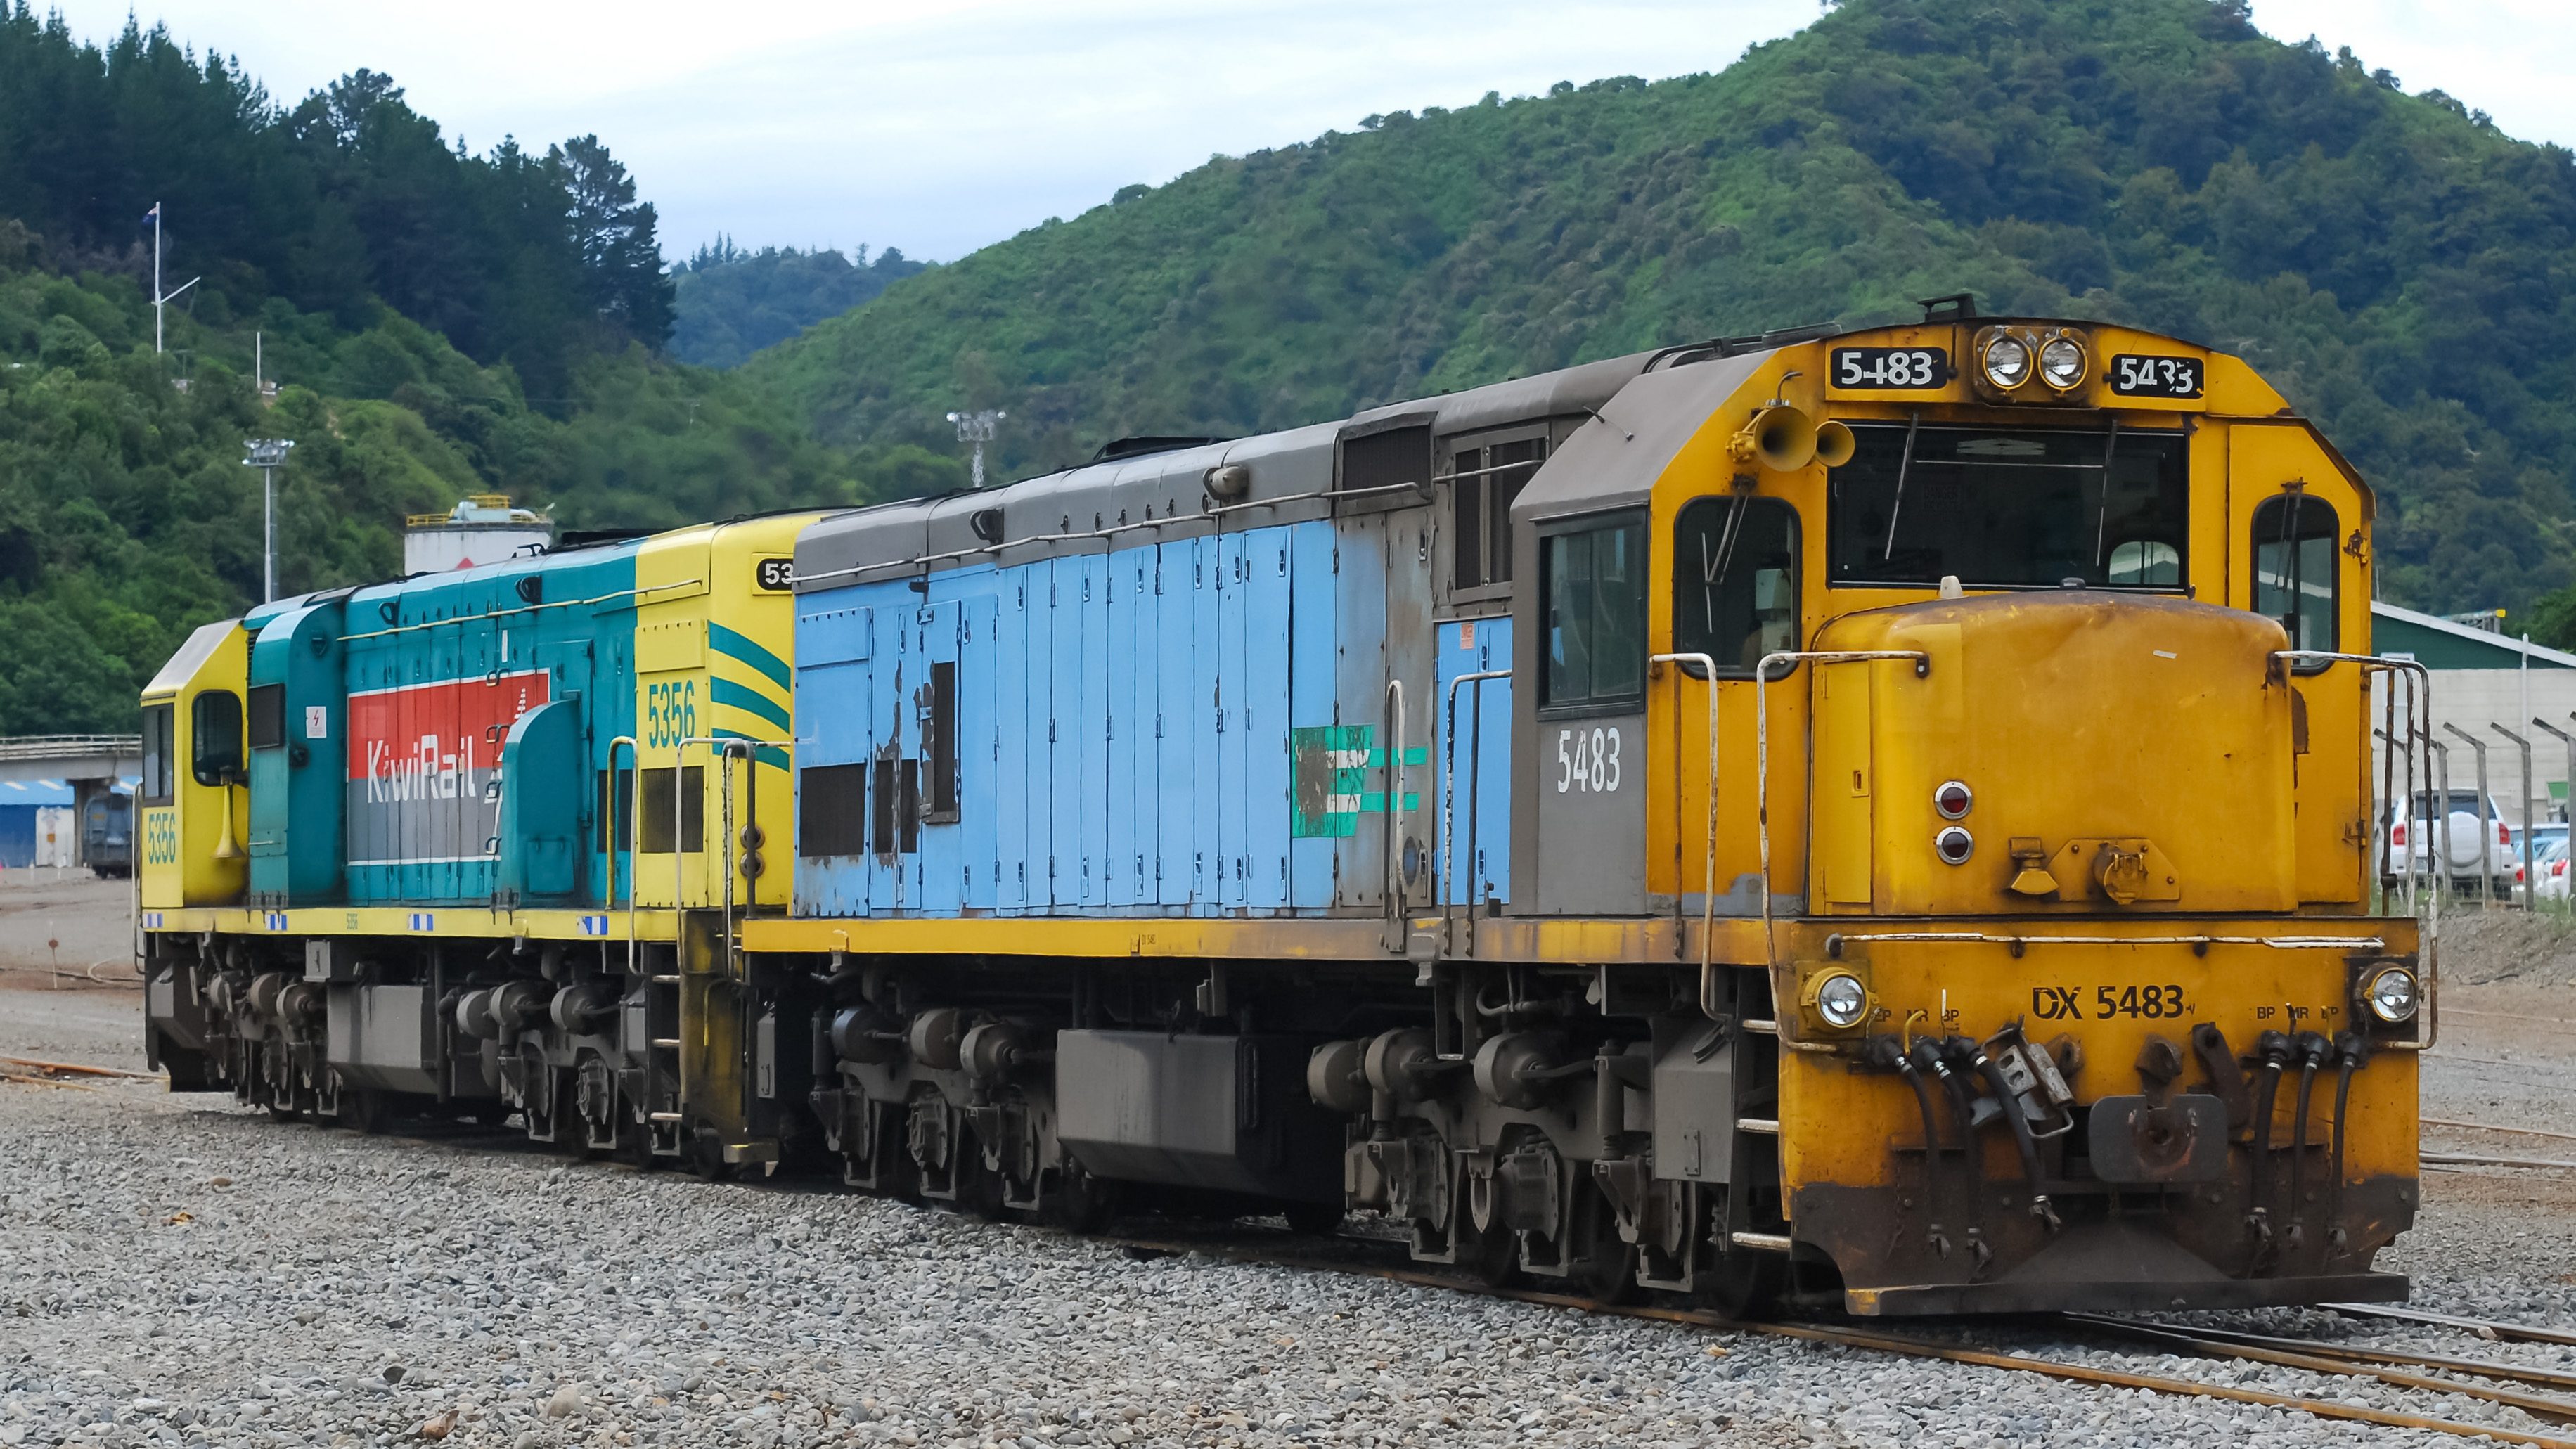 New Zealand DX class locomotive DX 5483 in Picton, together with DXC 5356 20100121 3